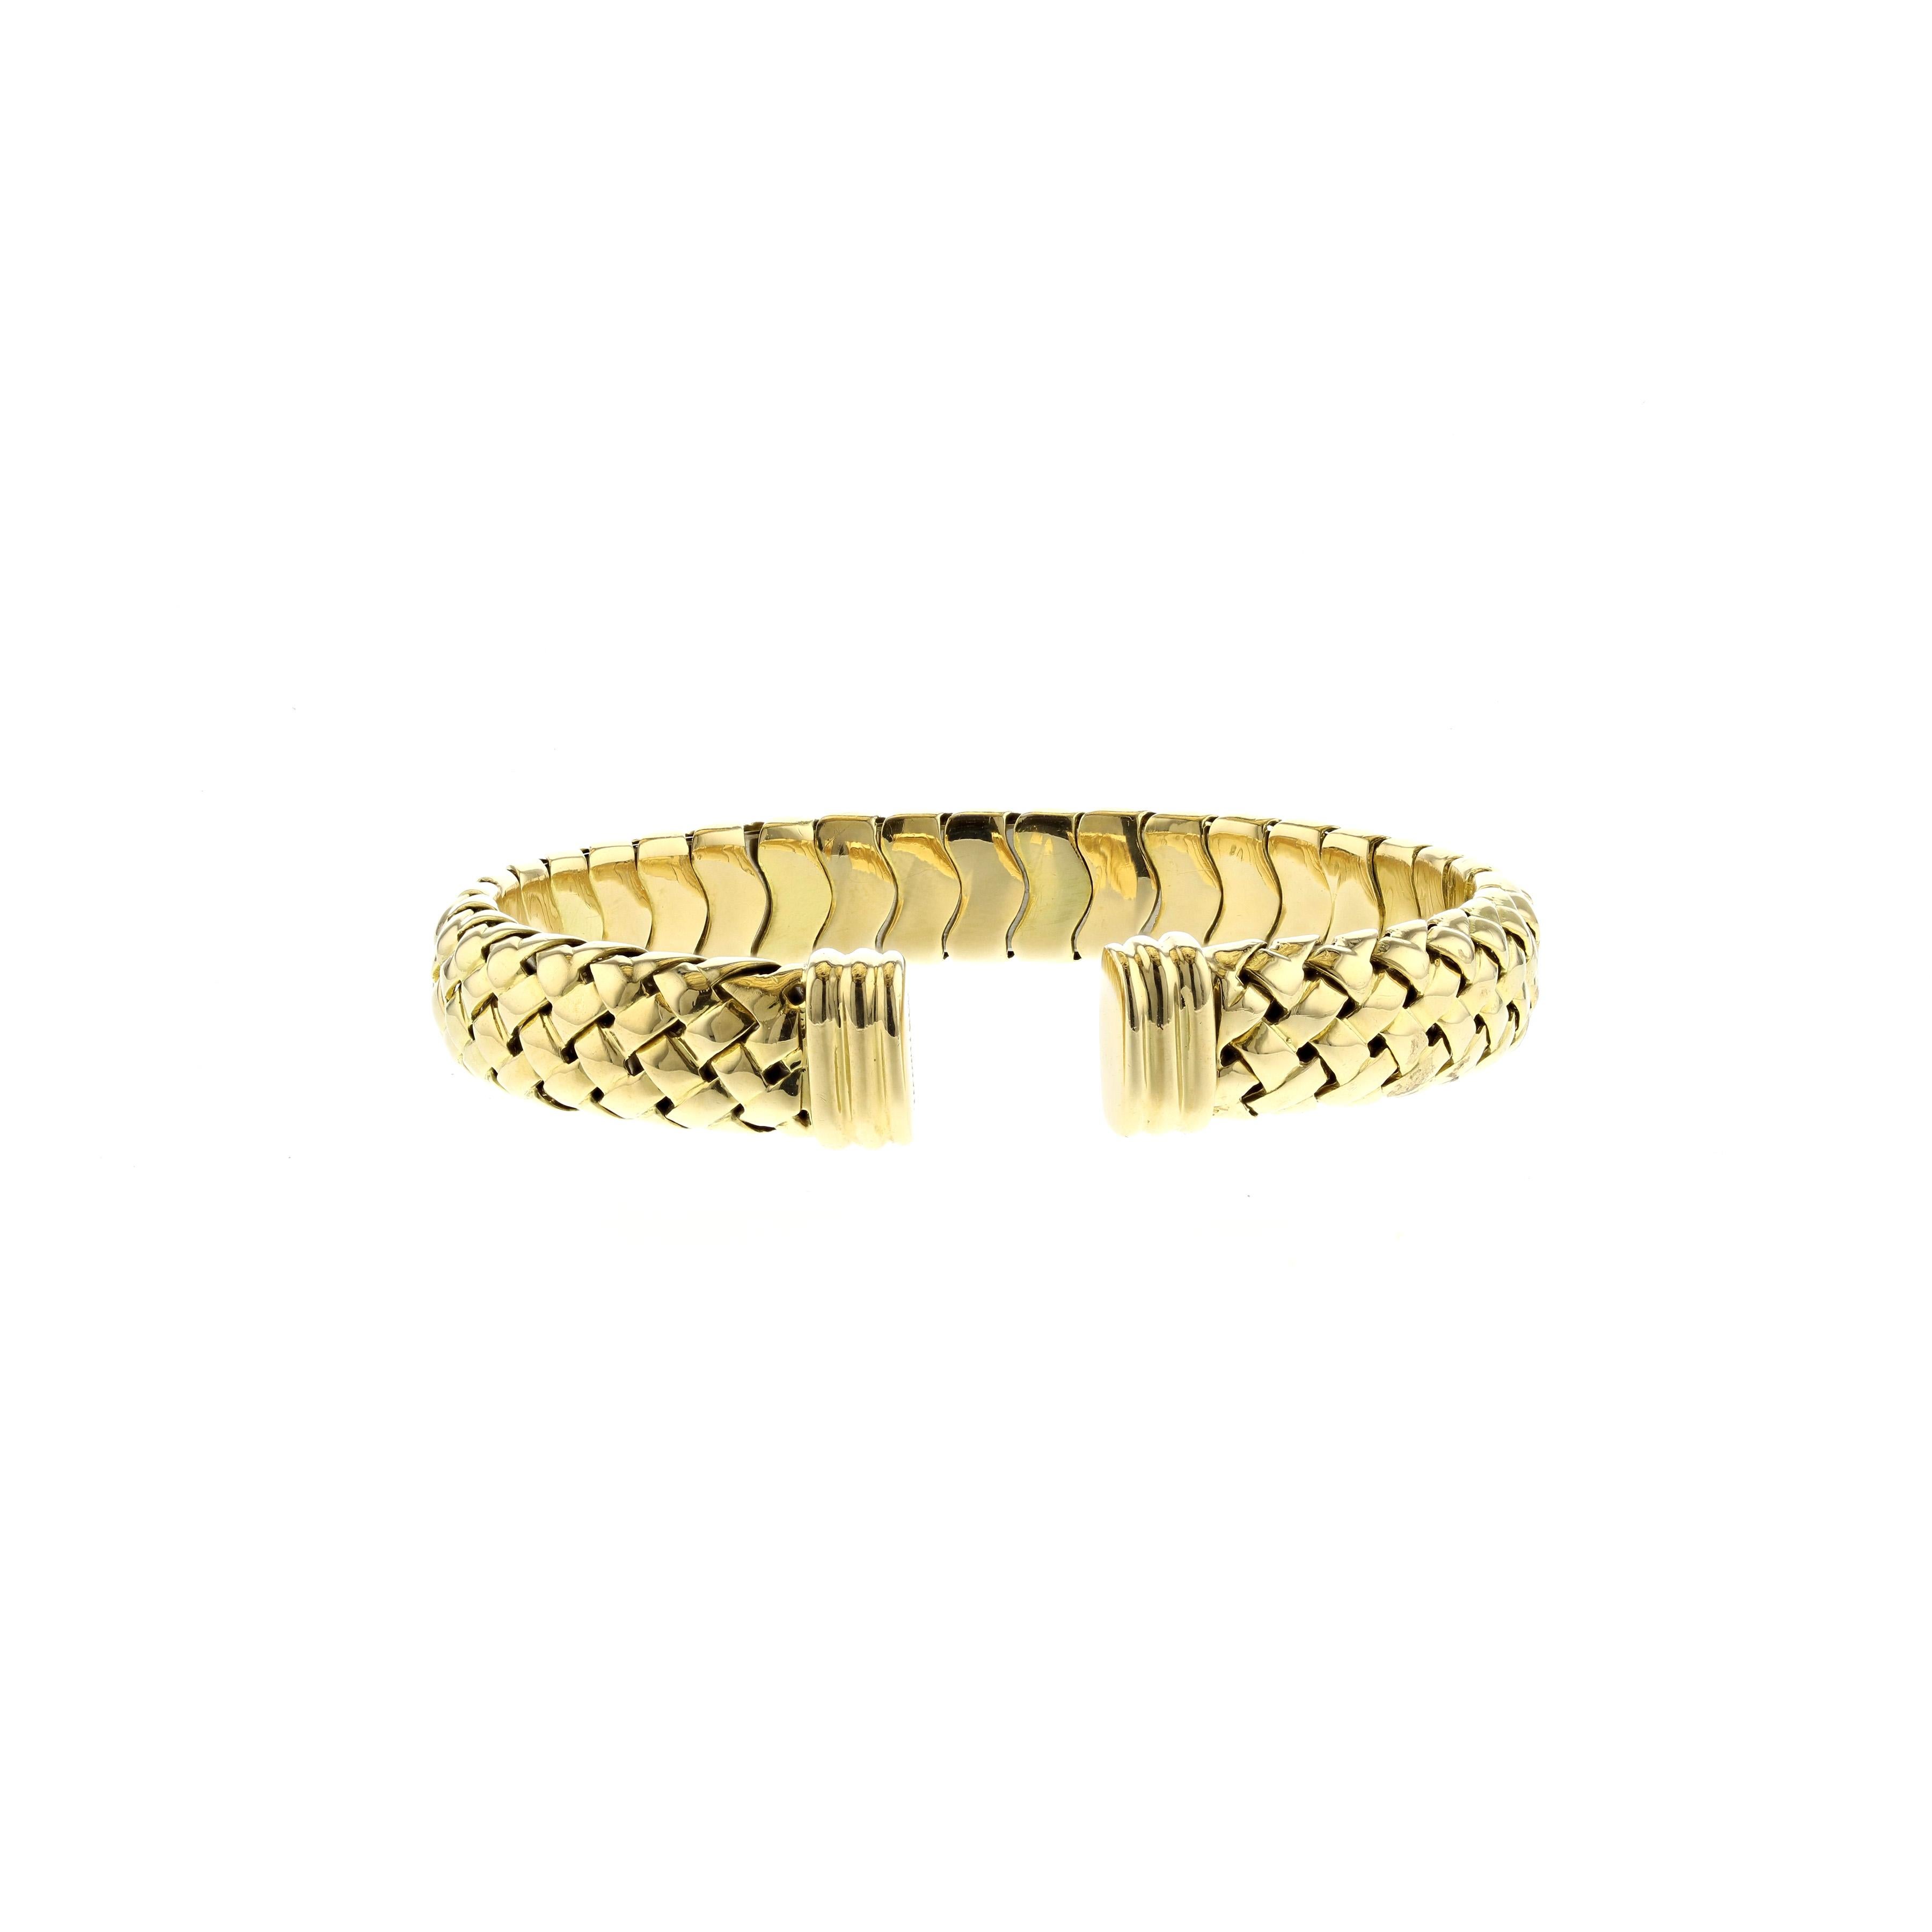 18K yellow gold cuff bracelet by Tiffany & Co.  It is a flexible cuff in a woven design.  Measures 3/8